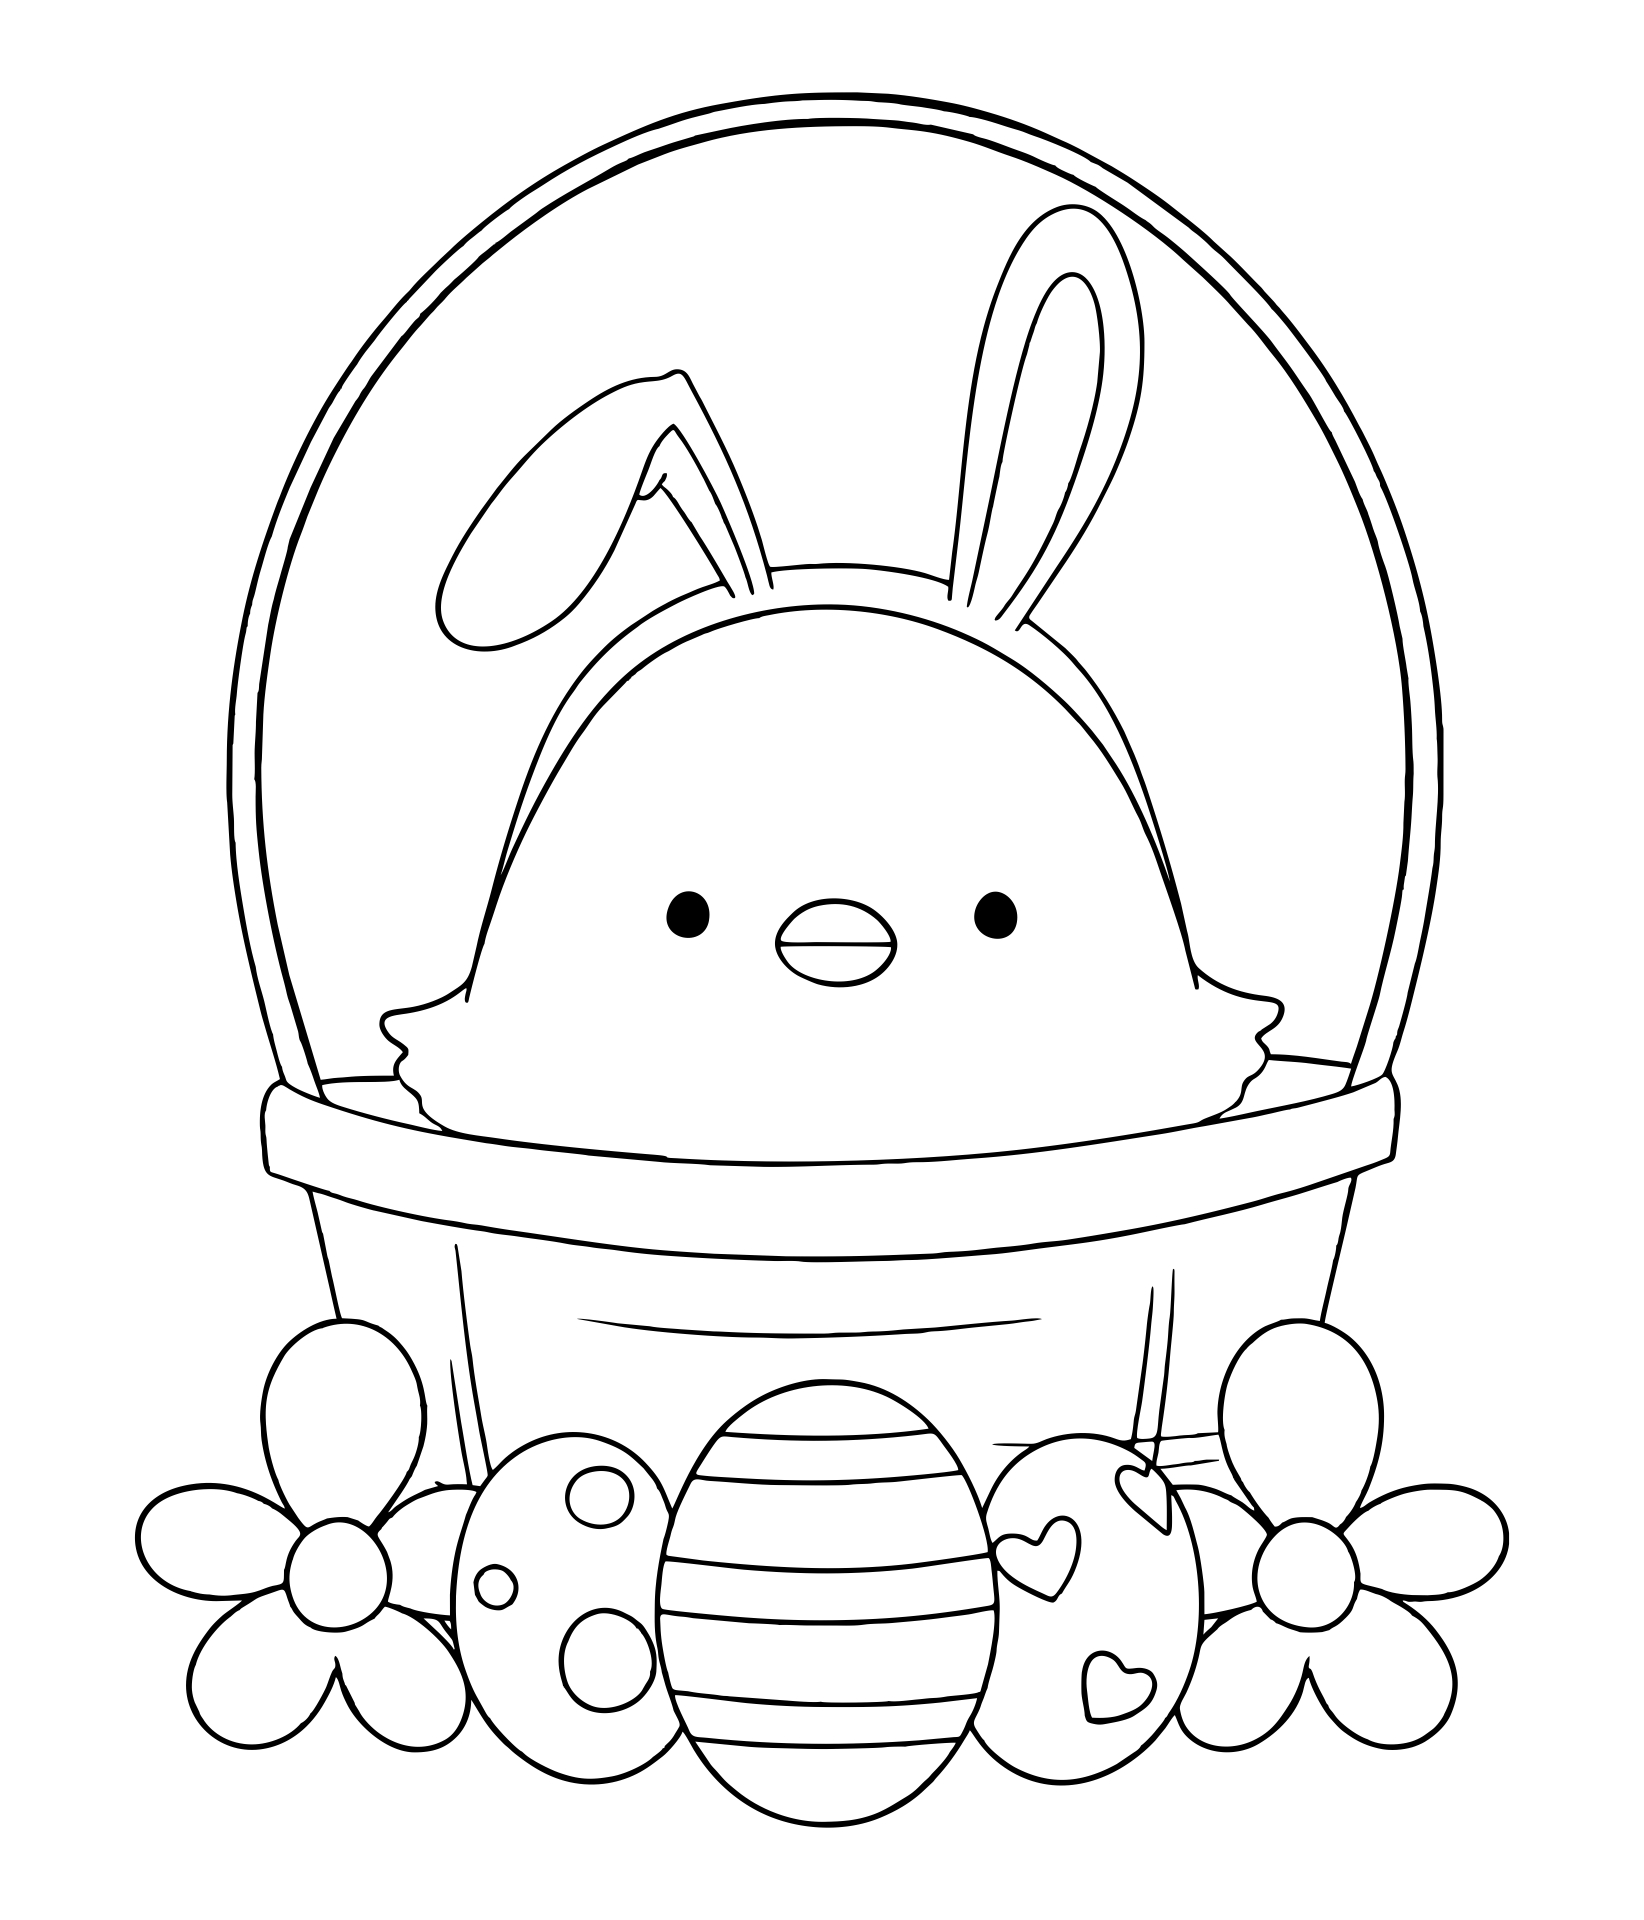 Easy How to Draw the Easter Bunny Tutorial Video and Easter Bunny Coloring  Page | Bunny coloring pages, Easter bunny colouring, Easter drawings